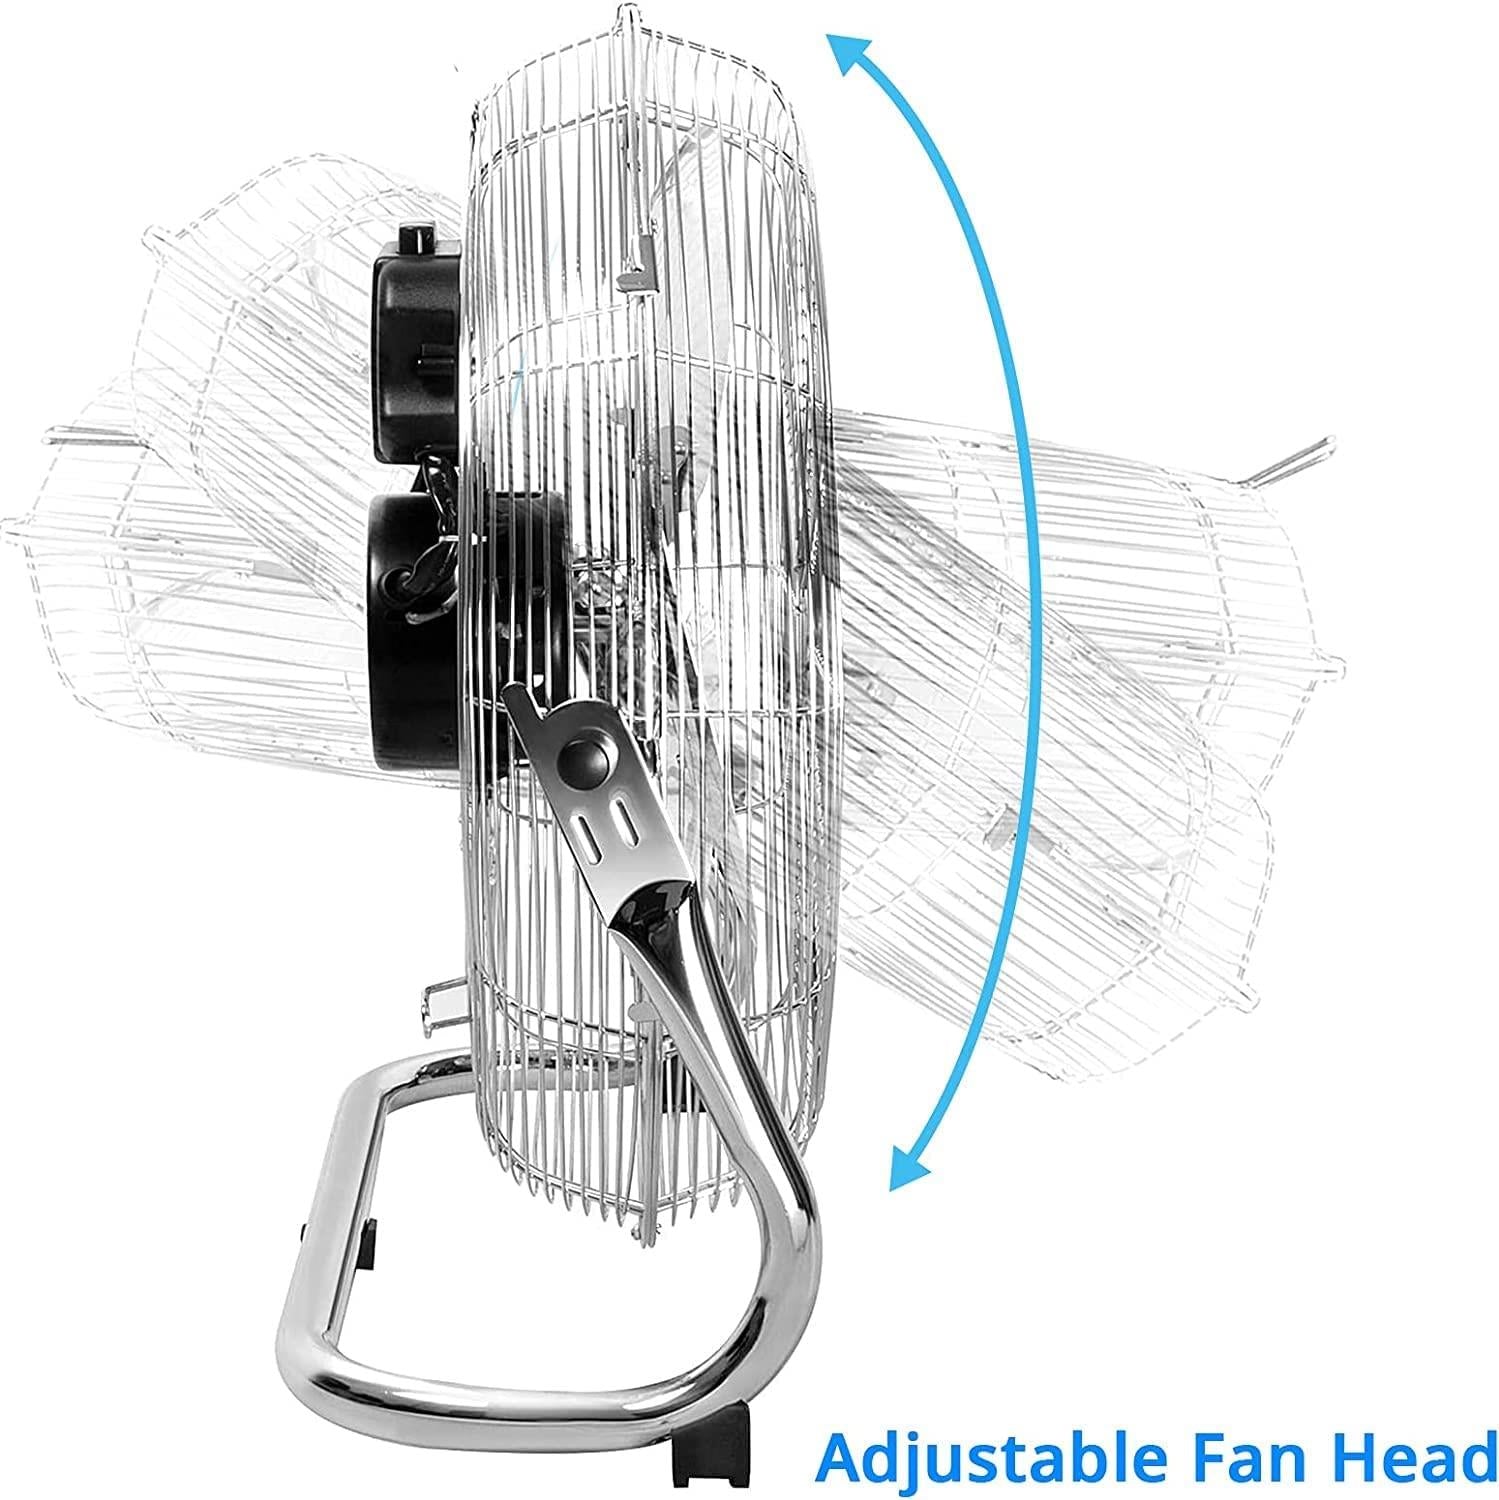 A picture showing the use of the classic chrome floor fan's adjustable head and the air flow angles that can be achieved